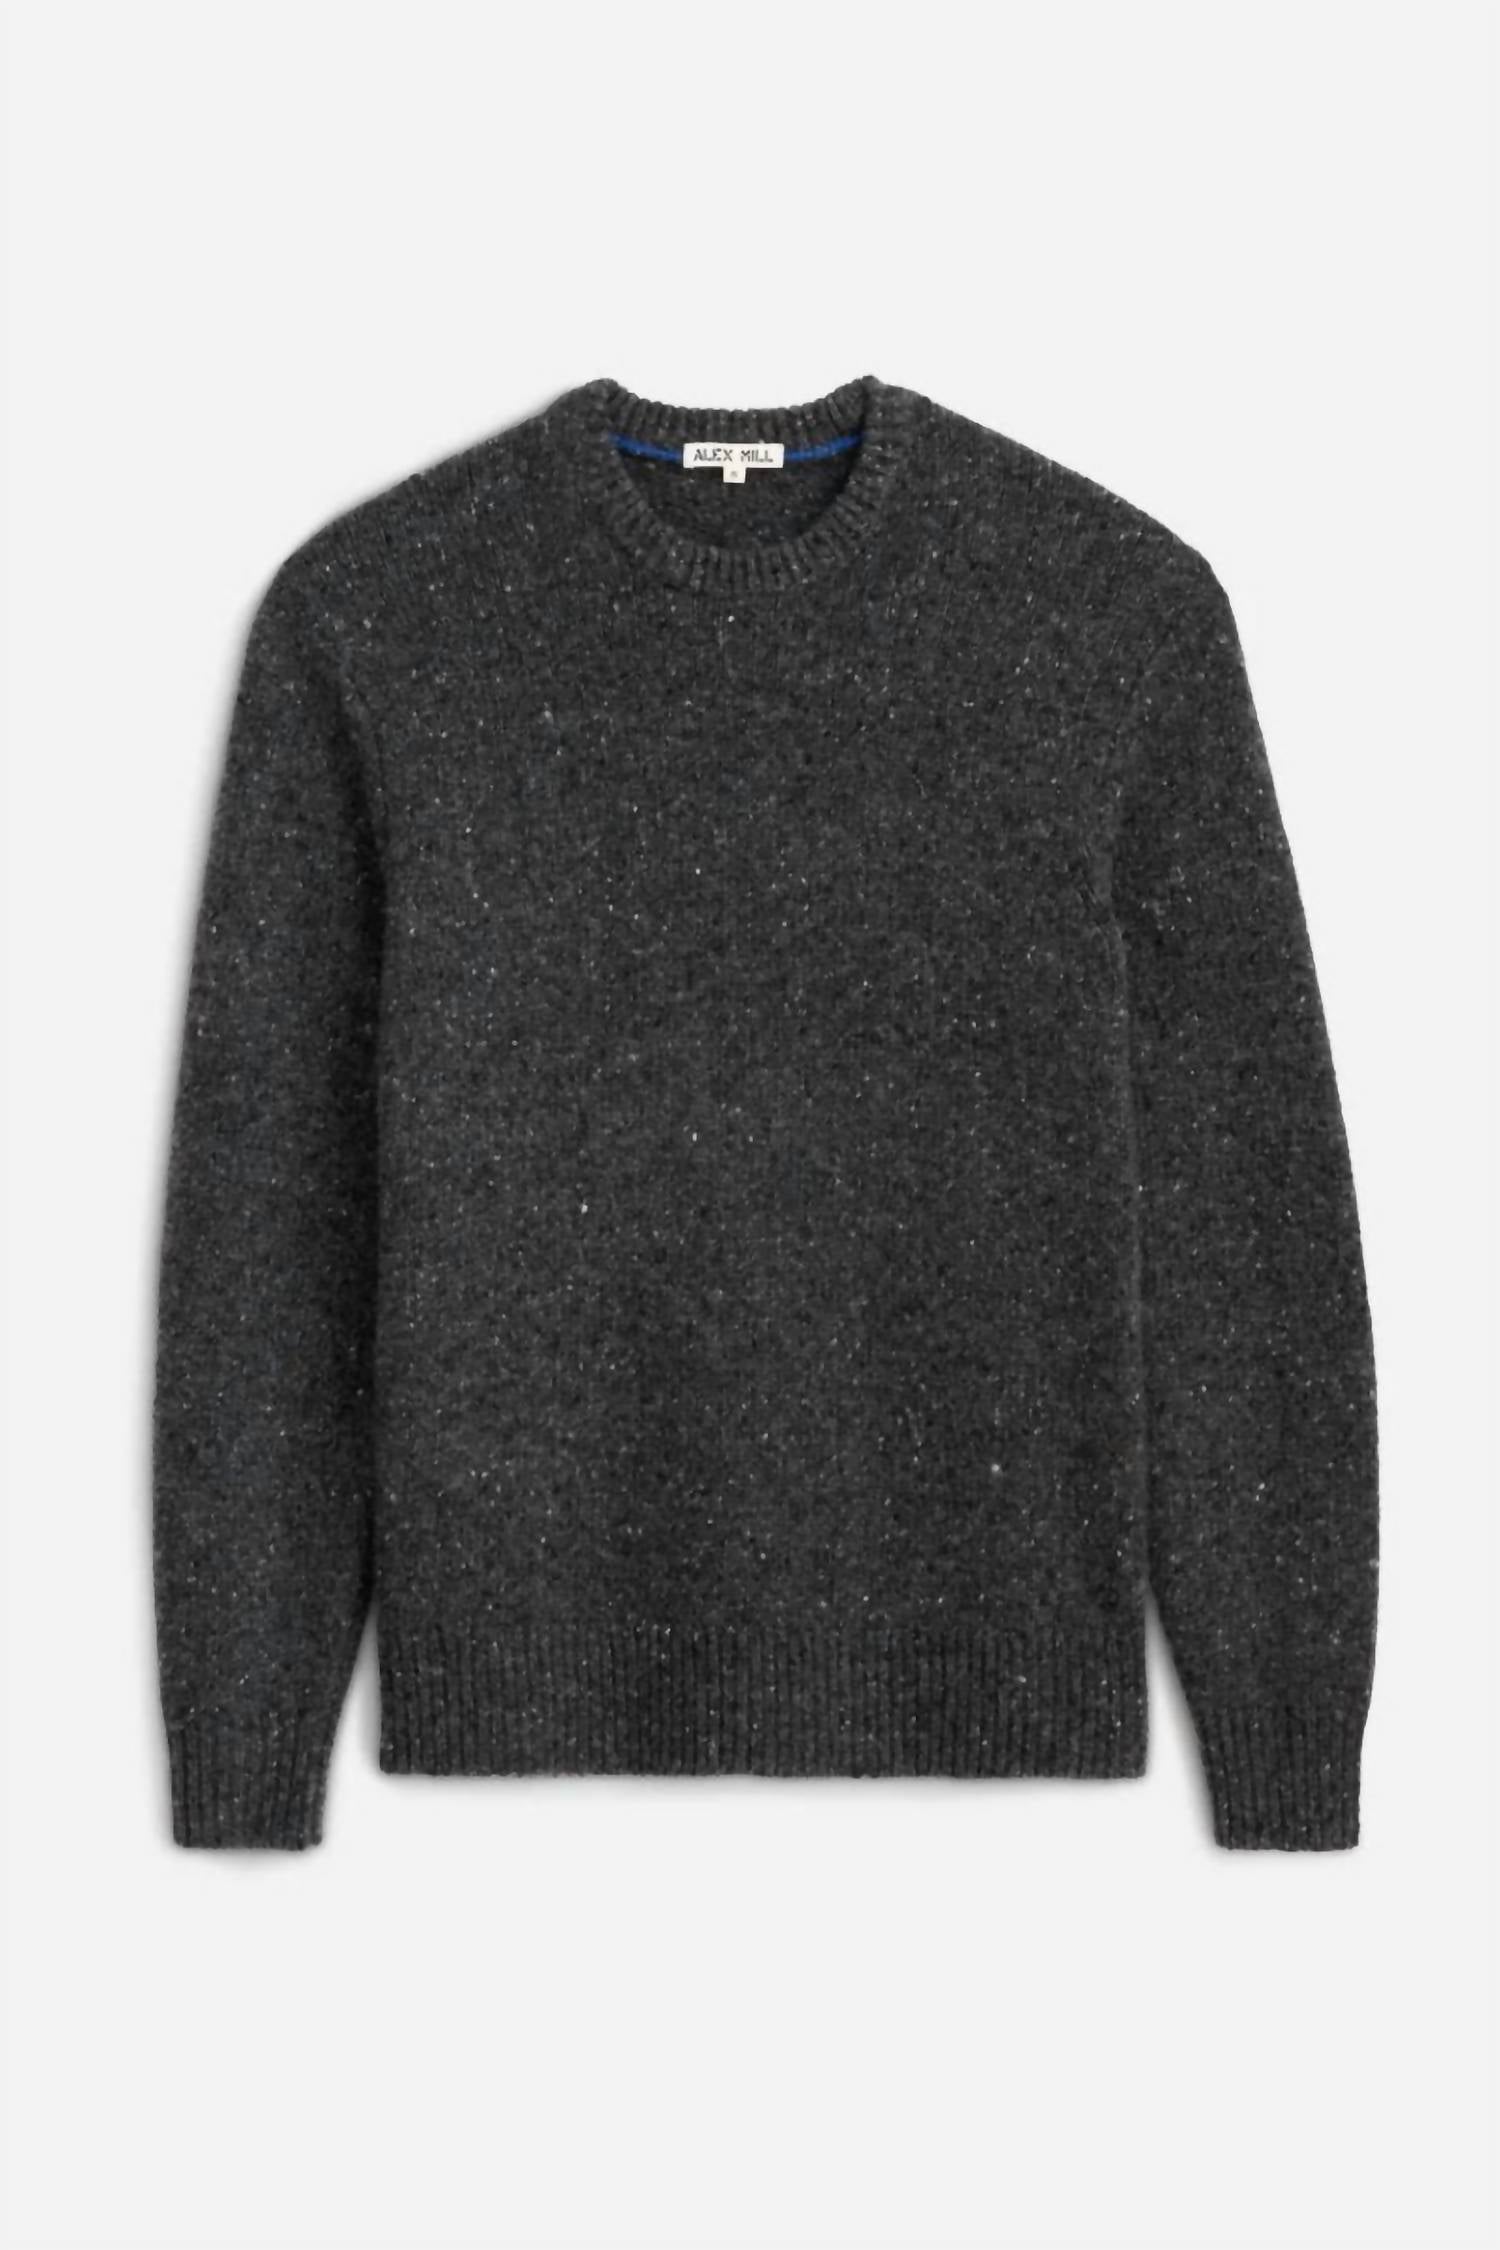 ALEX MILL Unisex - Donegal Crewneck Sweater In Charcoal